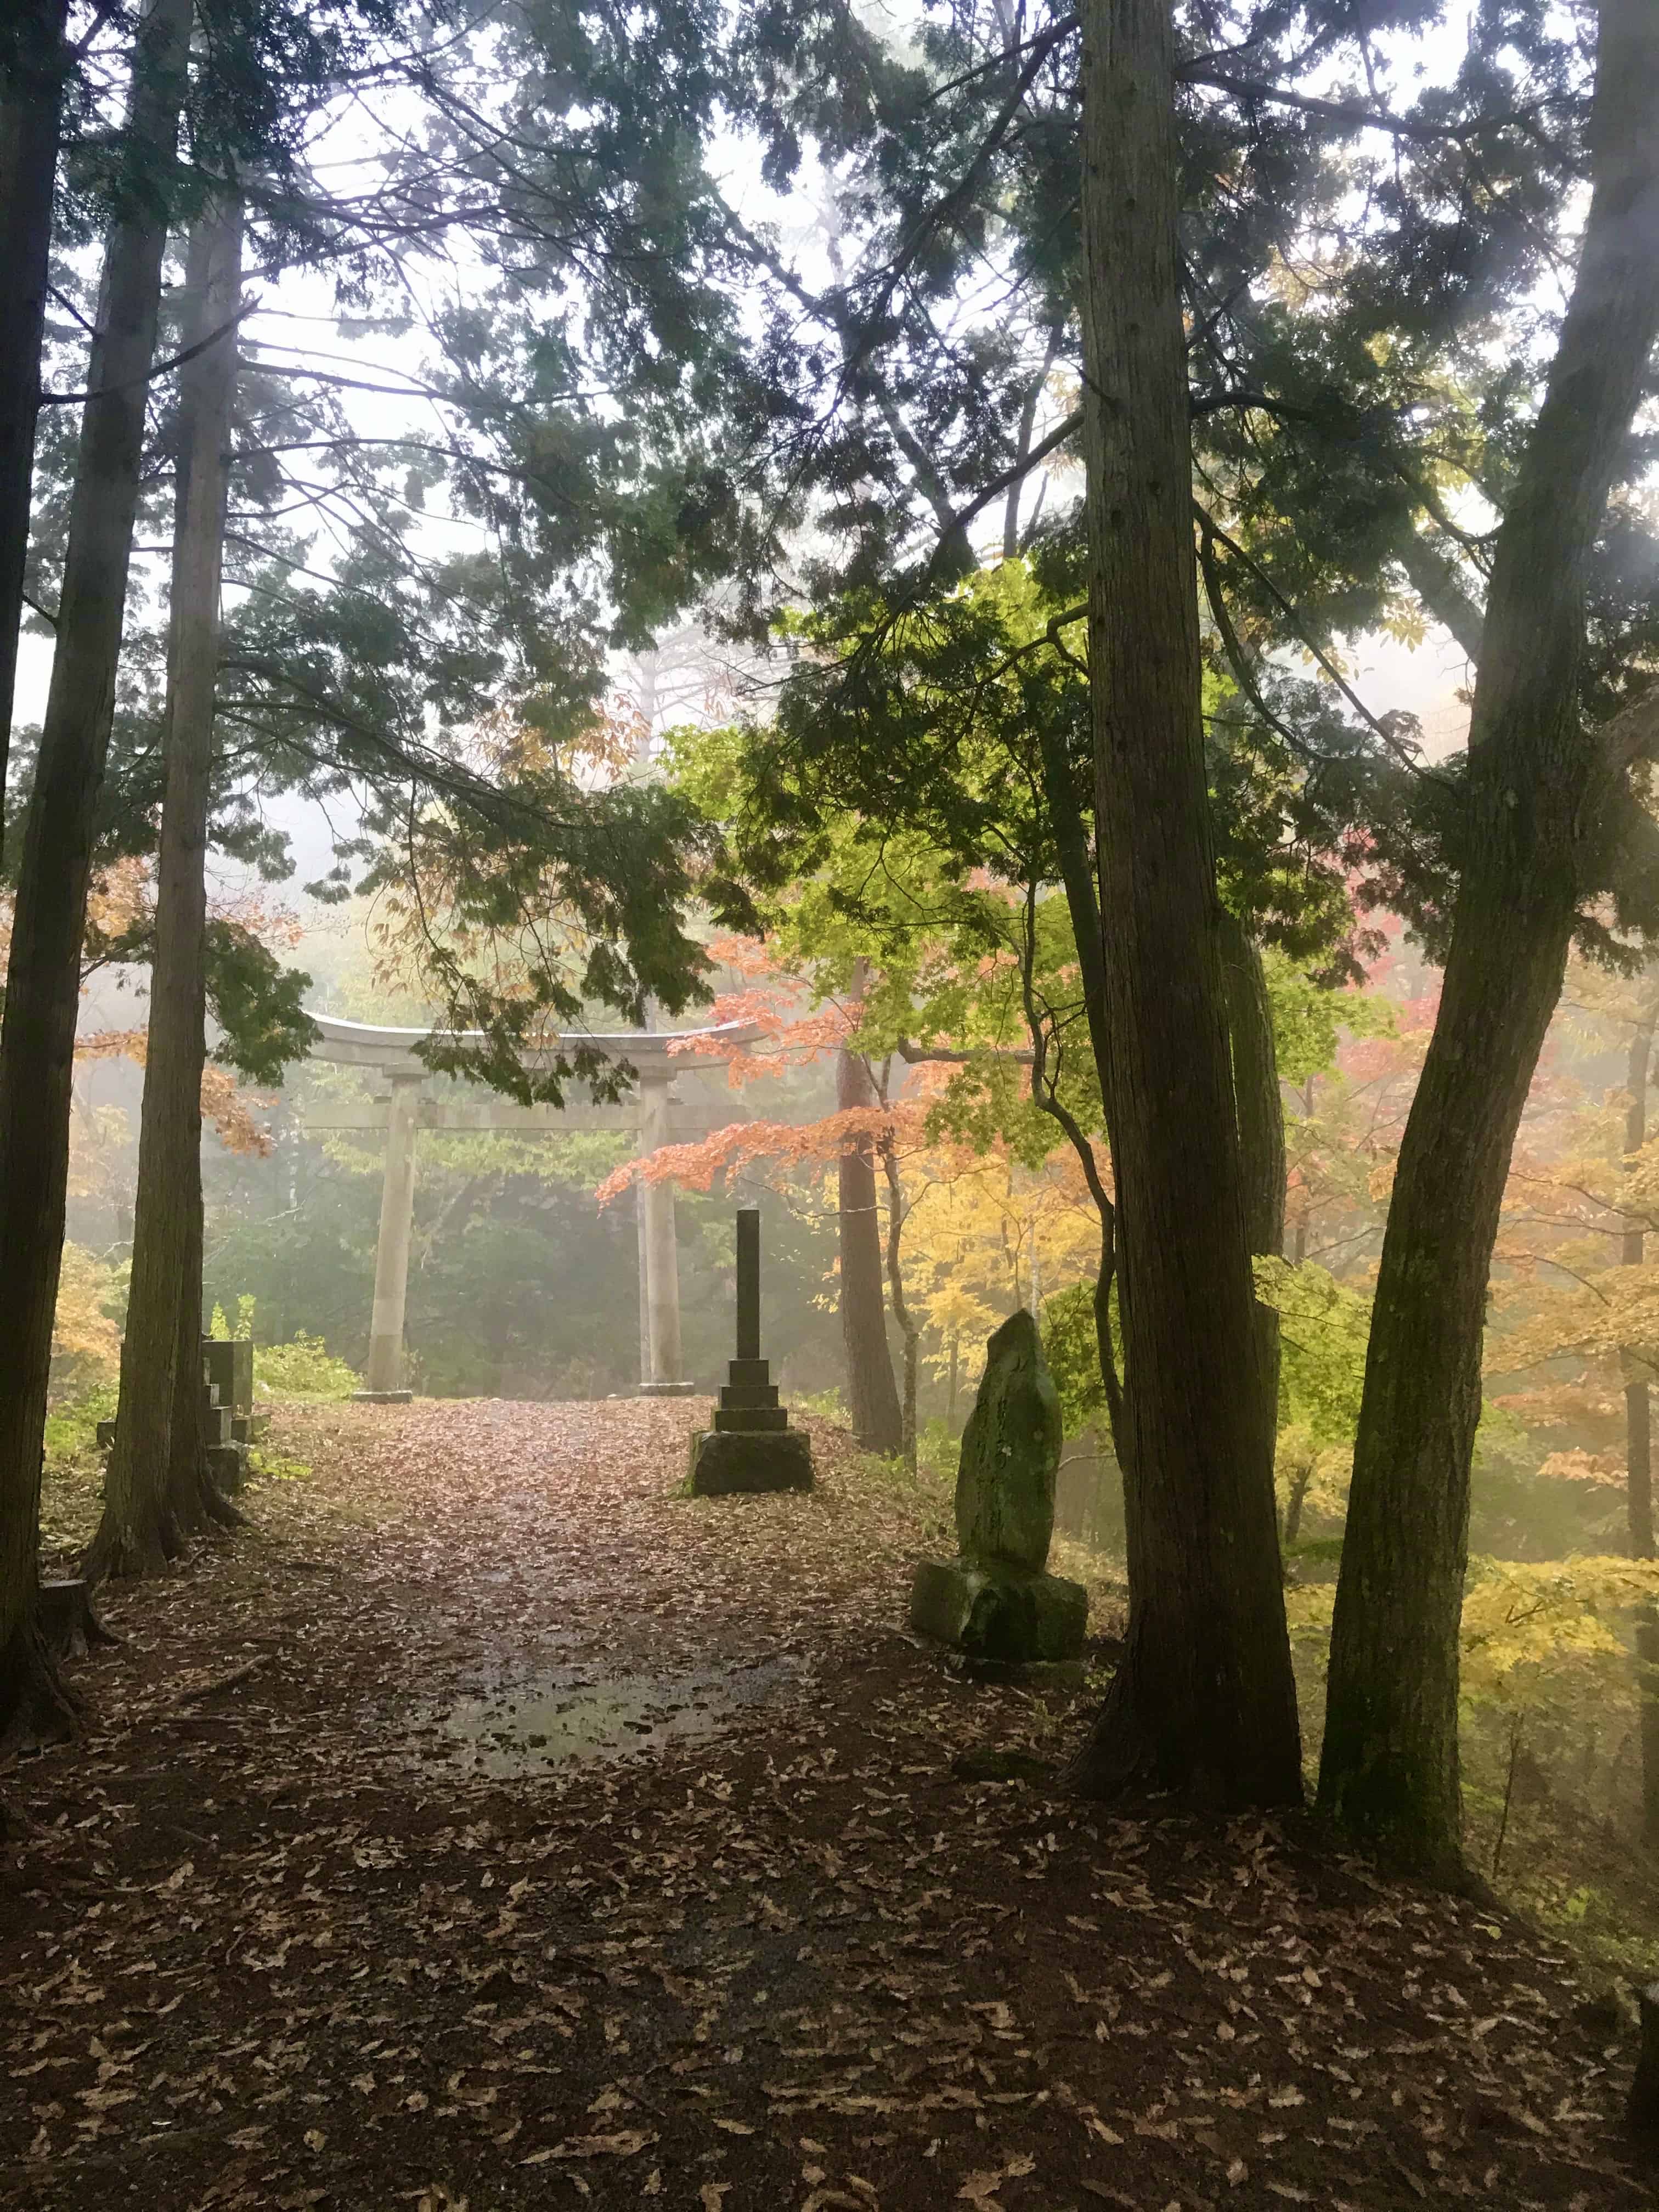 Torii gate in misty forest.